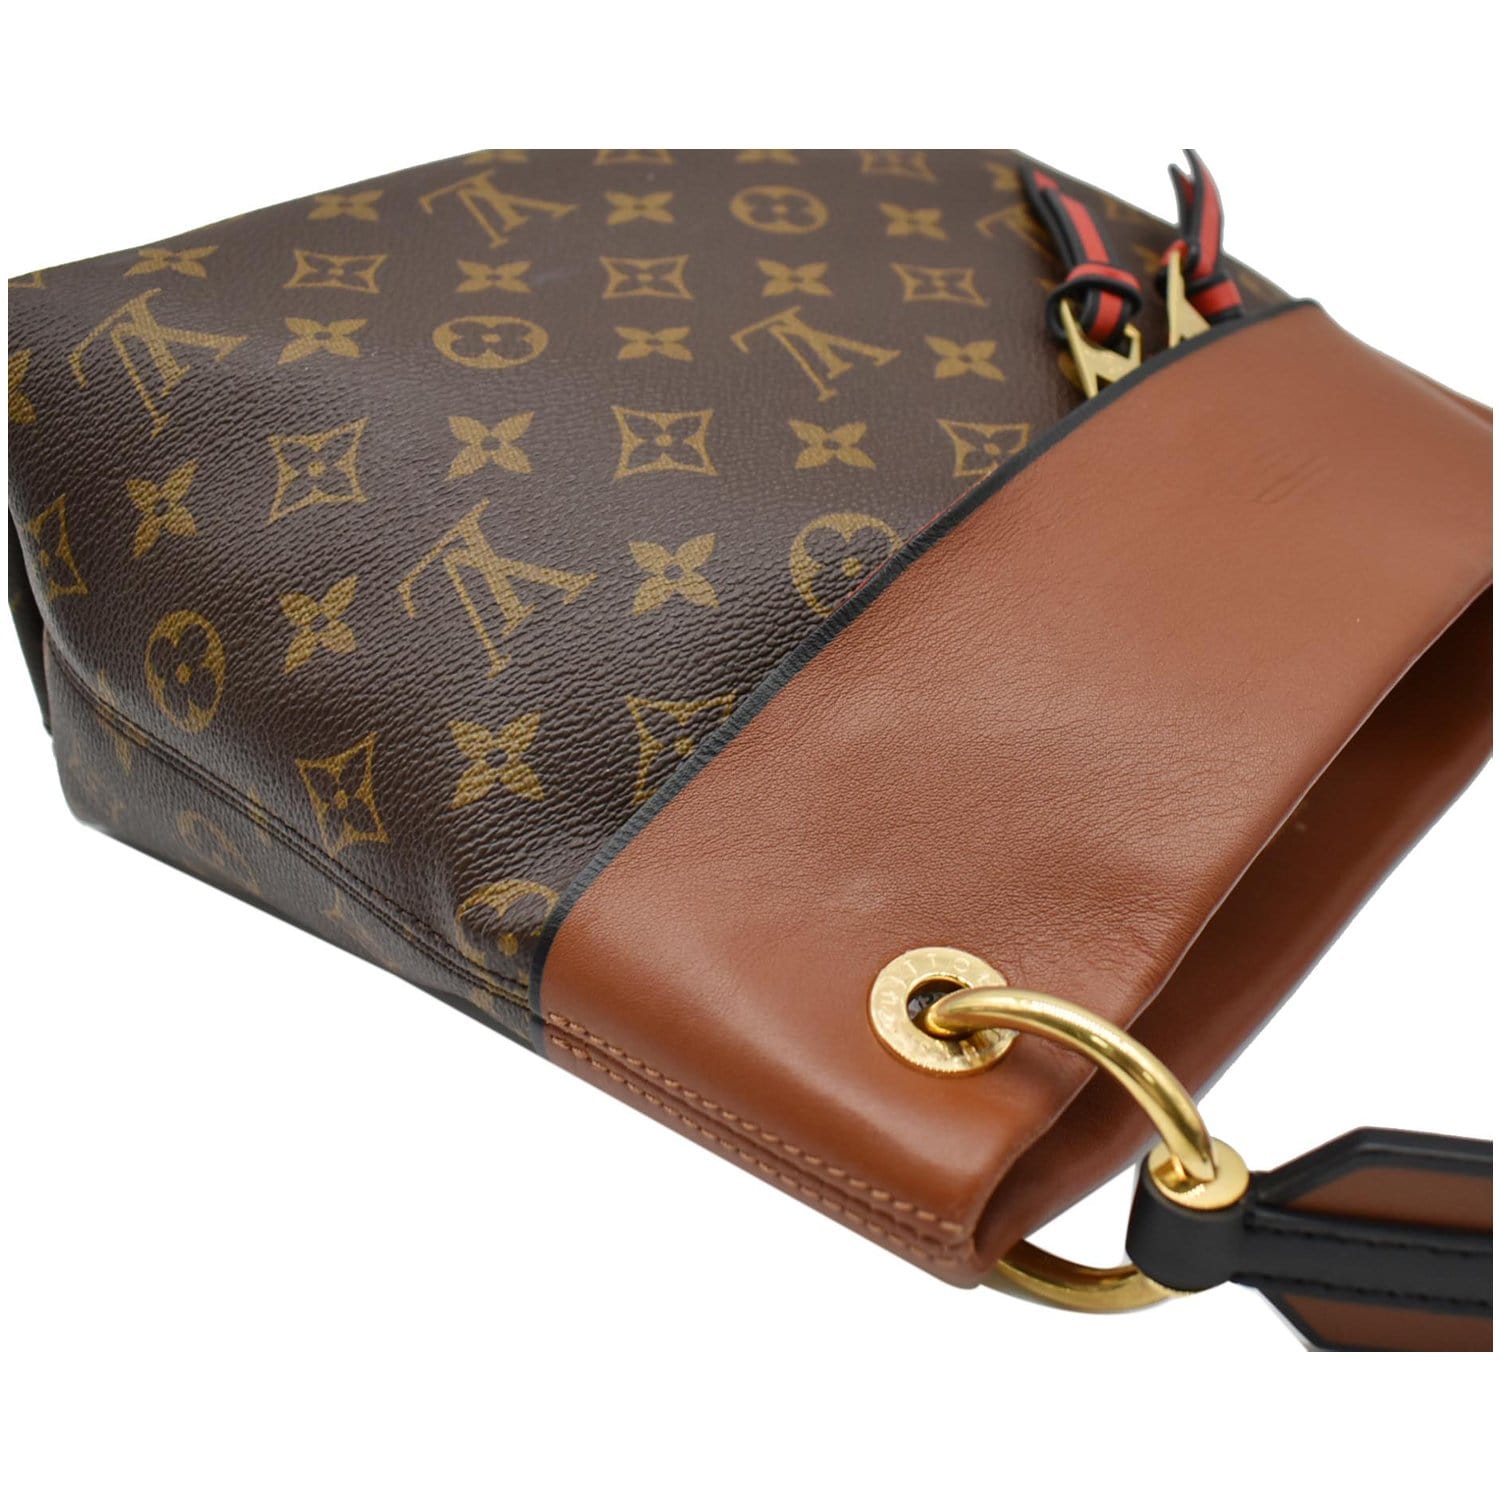 Bag of the Day 54: Louis Vuitton TUILERIES Monogram Canvas in Safran  Leather #bagoftheday 